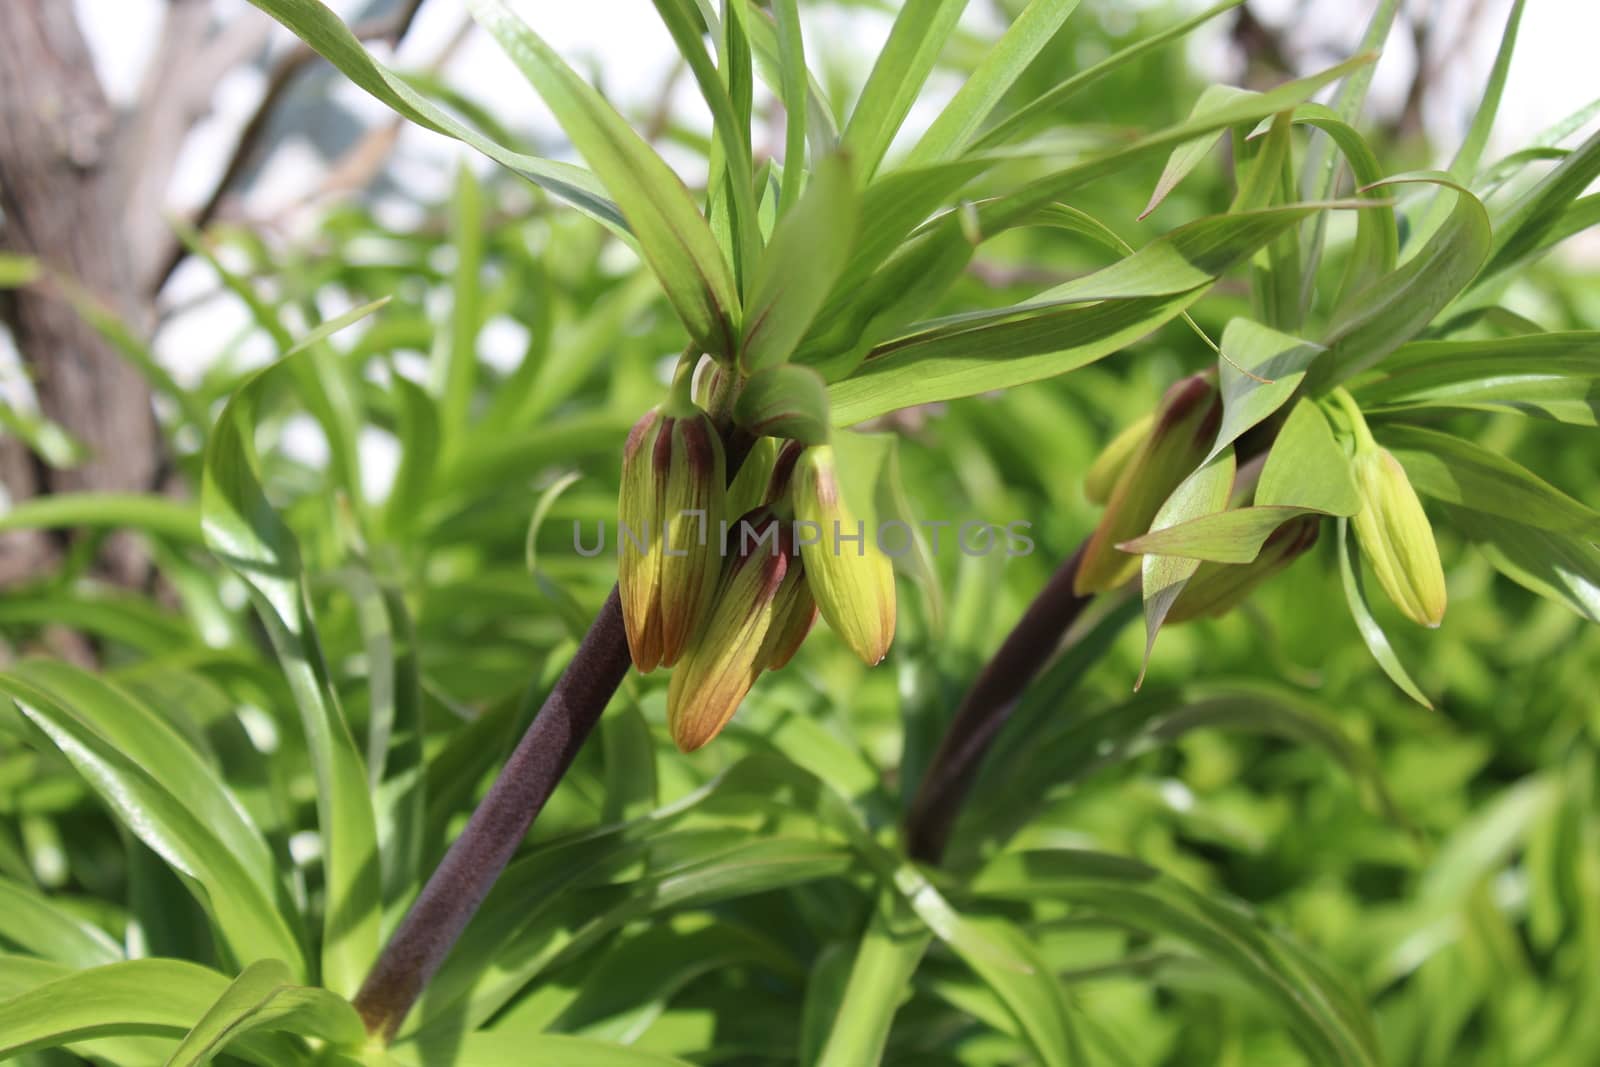 The picture shows buds of the crown imperial.